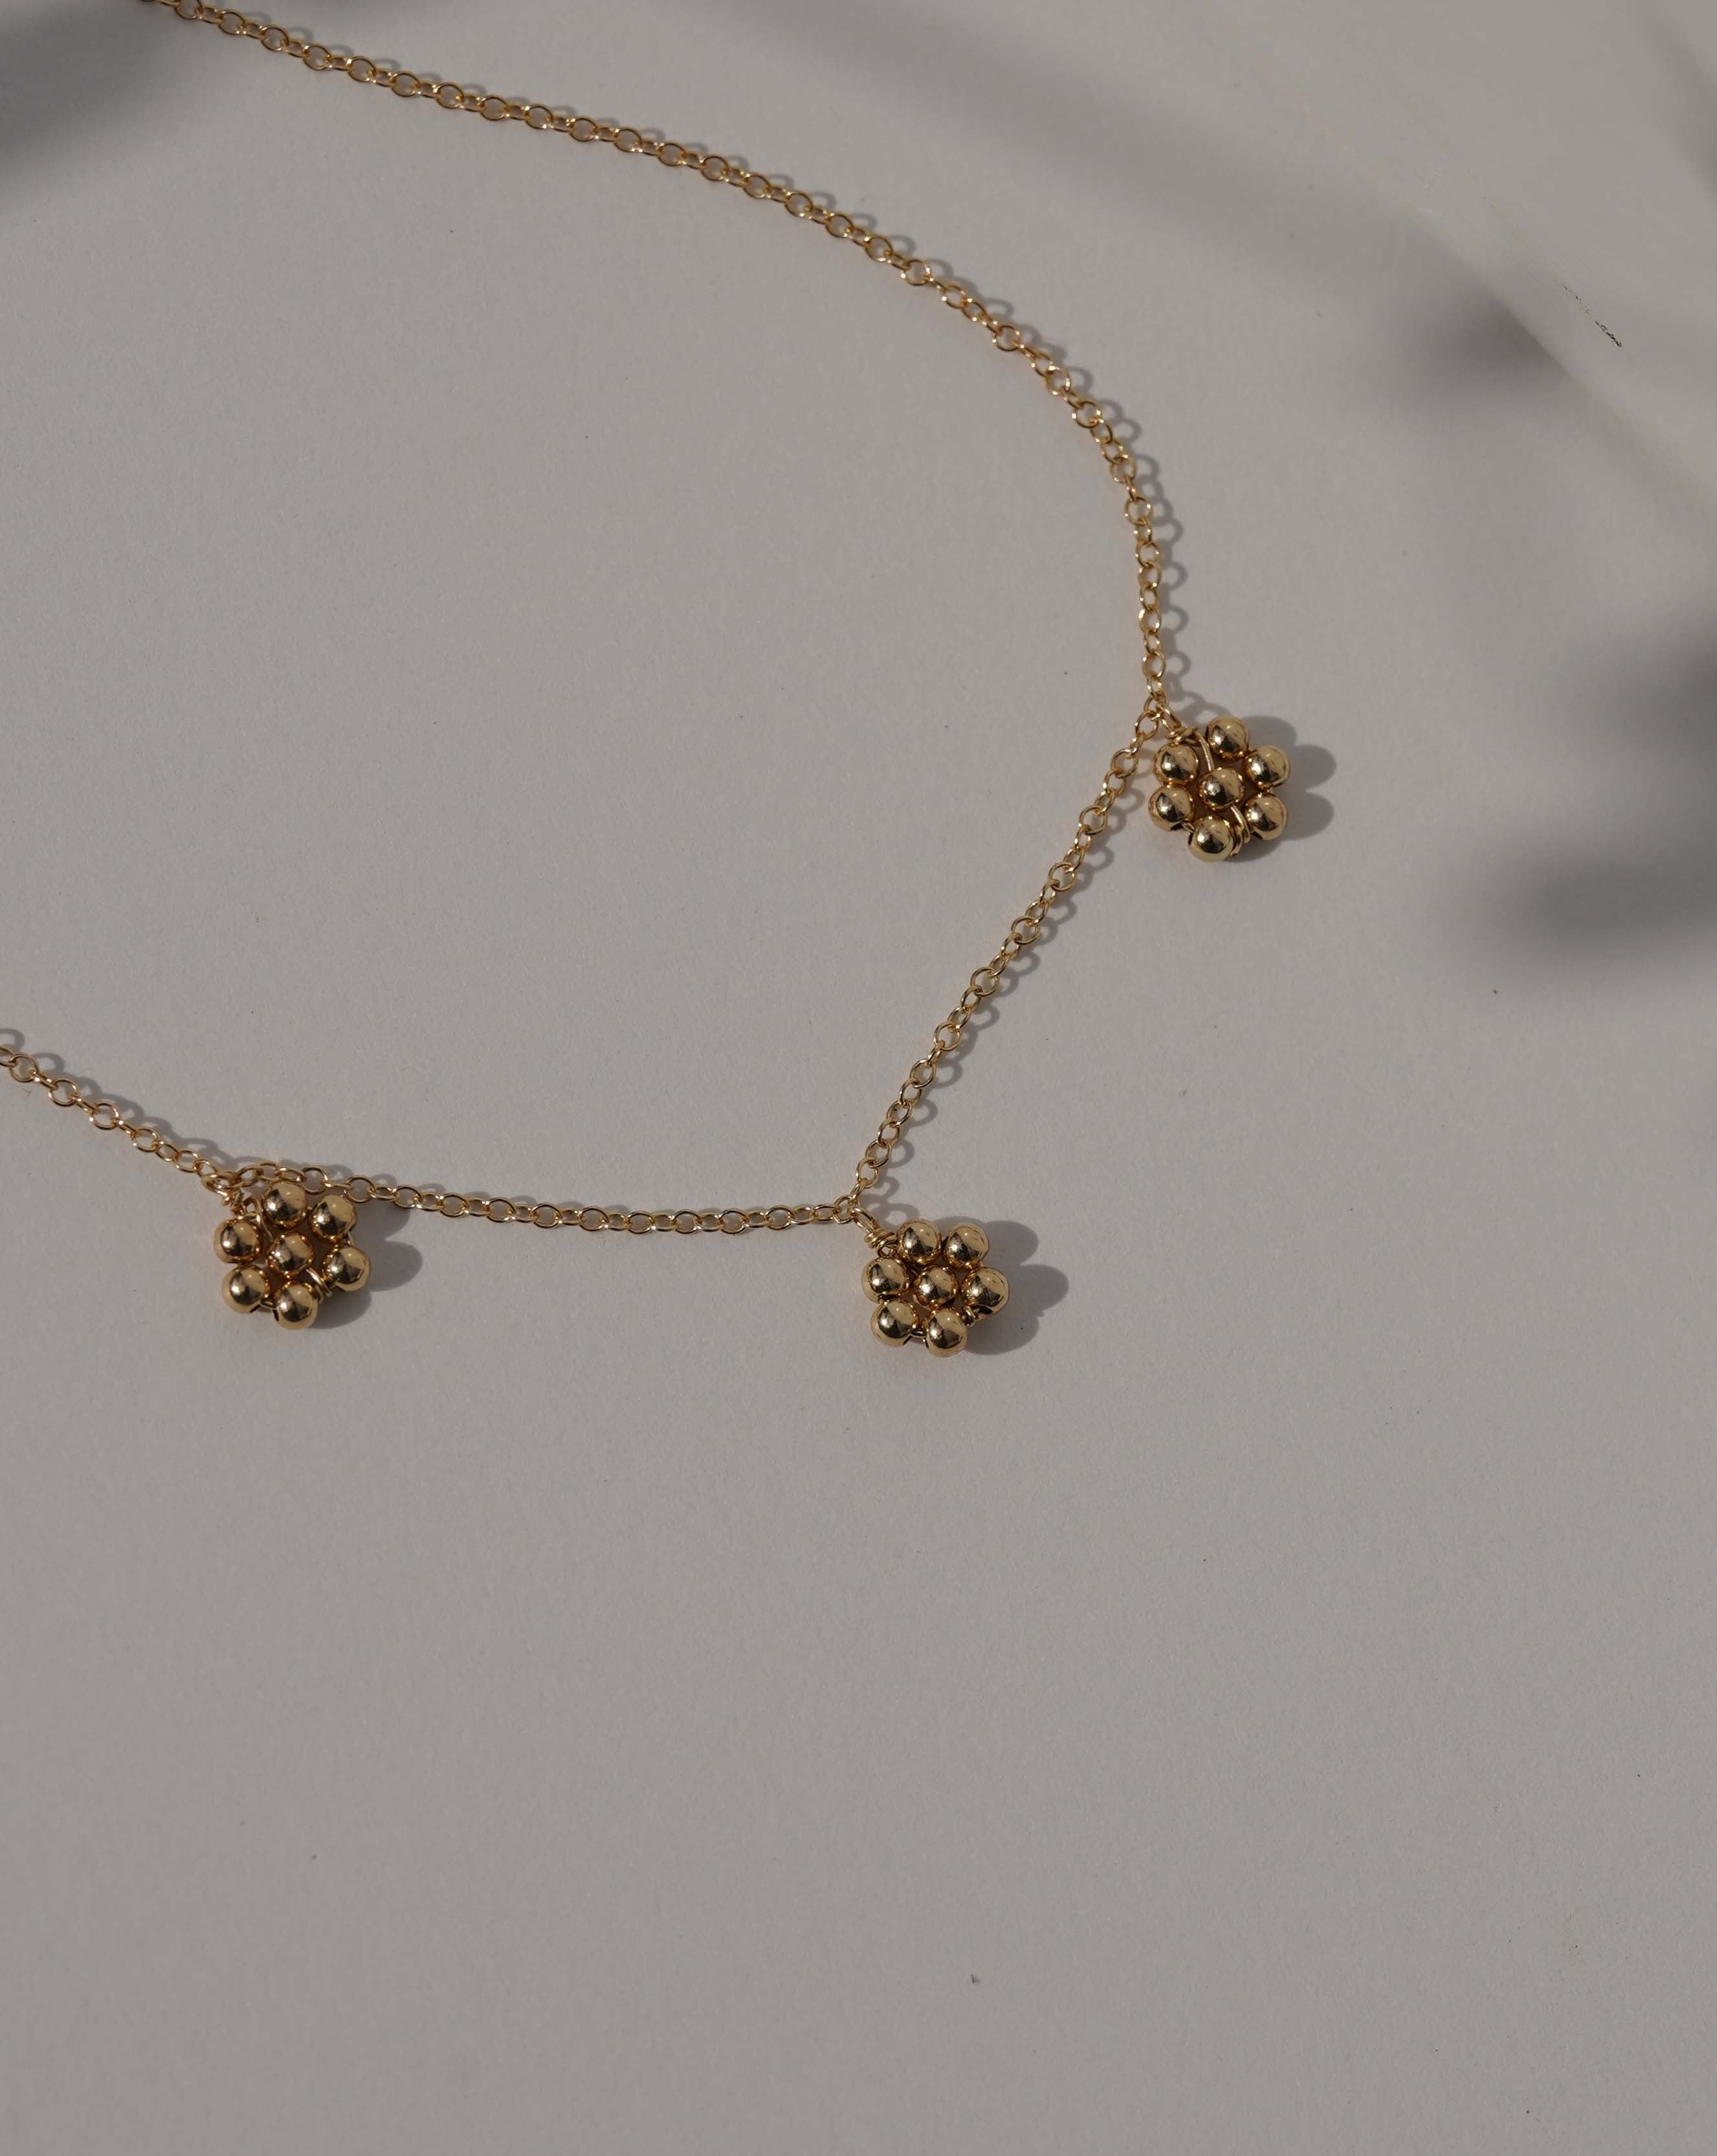 Flora Necklace by KOZAKH. A 16 to 18 inch adjustable length necklace in 14K Gold Filled, featuring handmade gold beaded daisies.